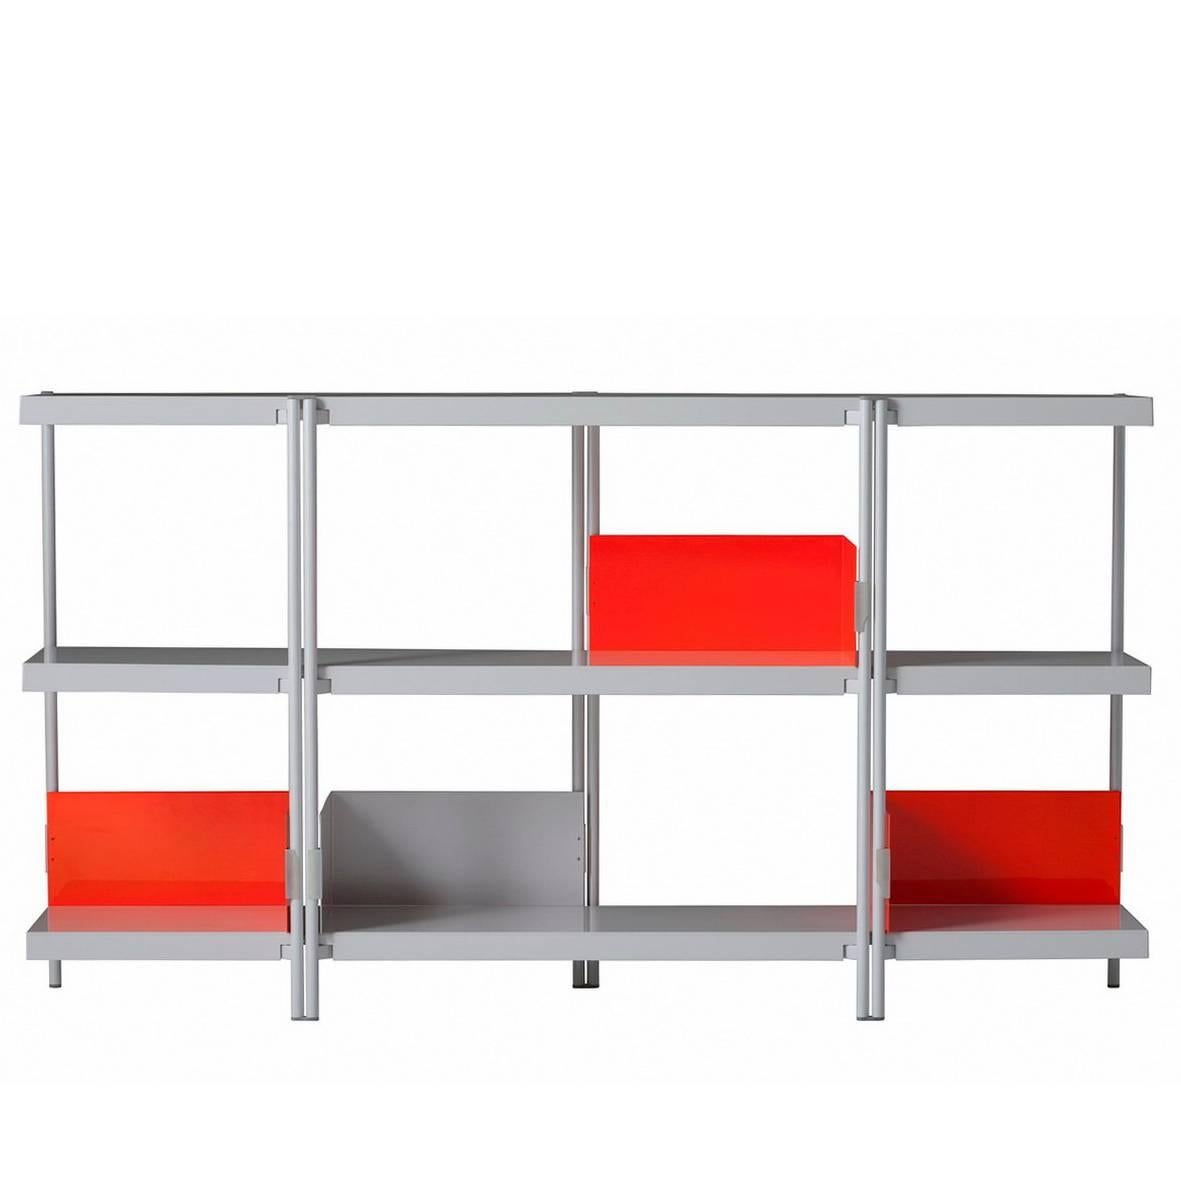 "Zigzag" Black or White Painted Steel Low Bookcase by Konstantin Grcic, Driade